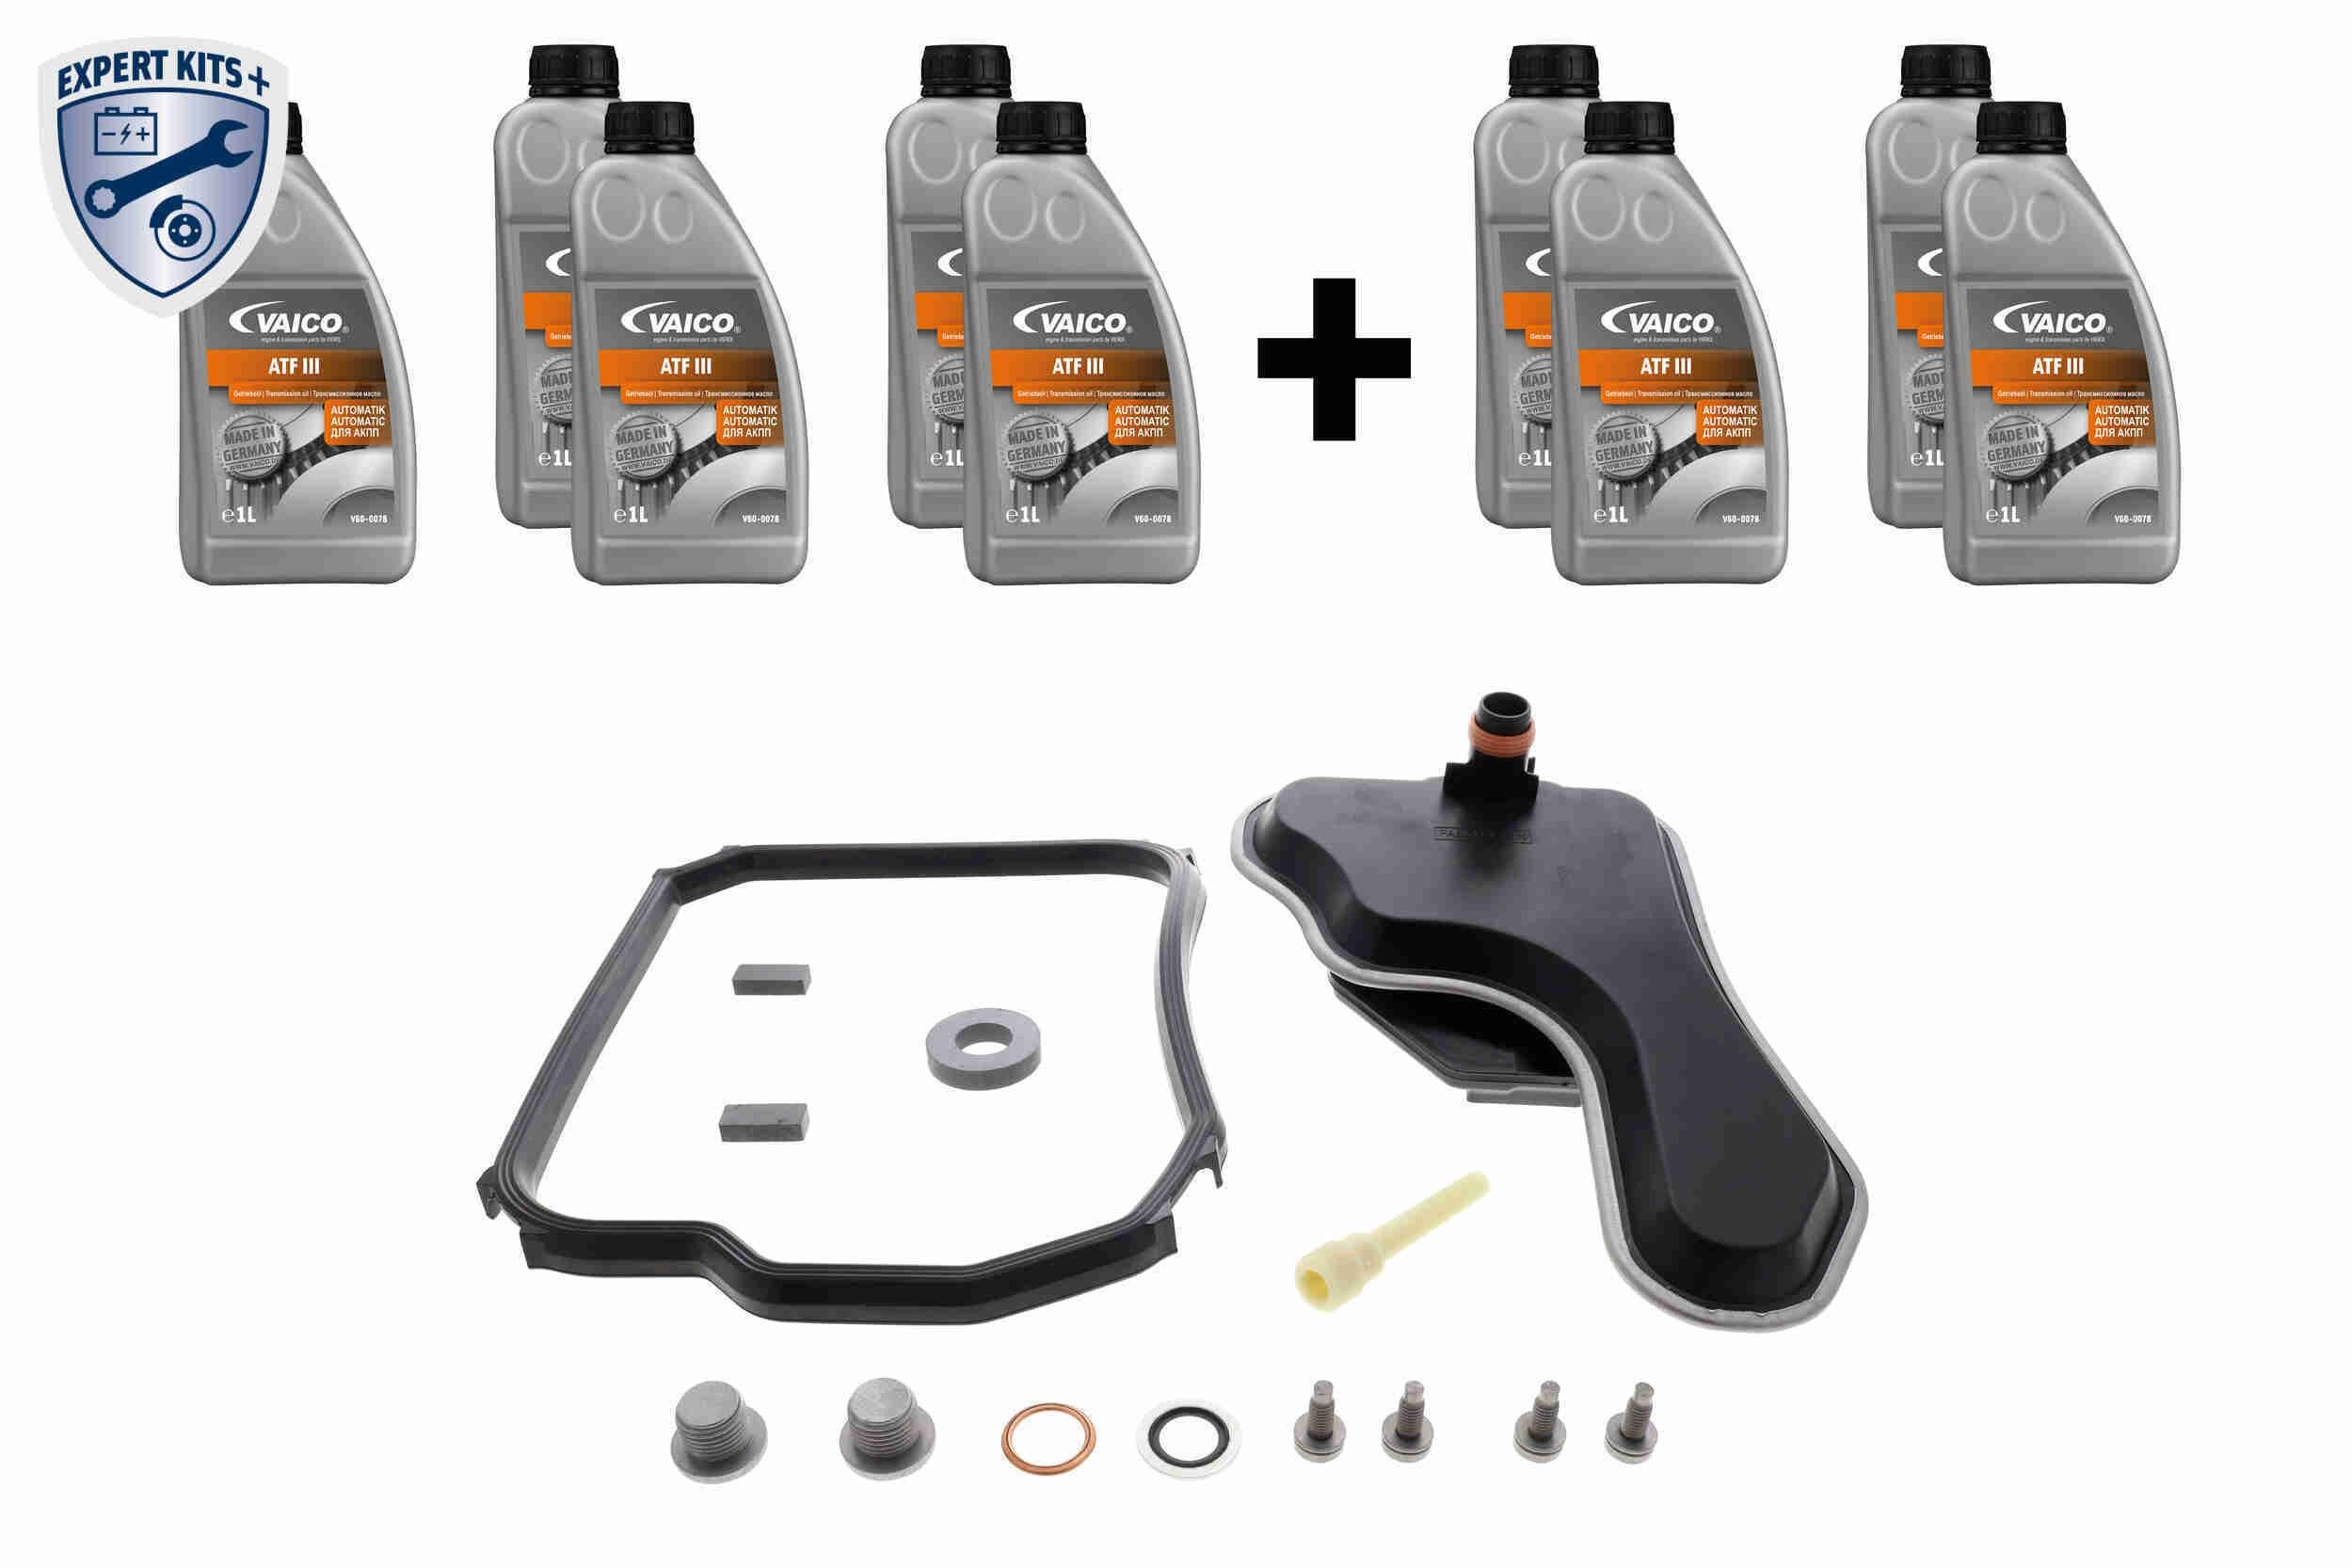 V22-0737-XXL VAICO Parts kit, automatic transmission oil change RENAULT with accessories, with oil quantity for oil flushing